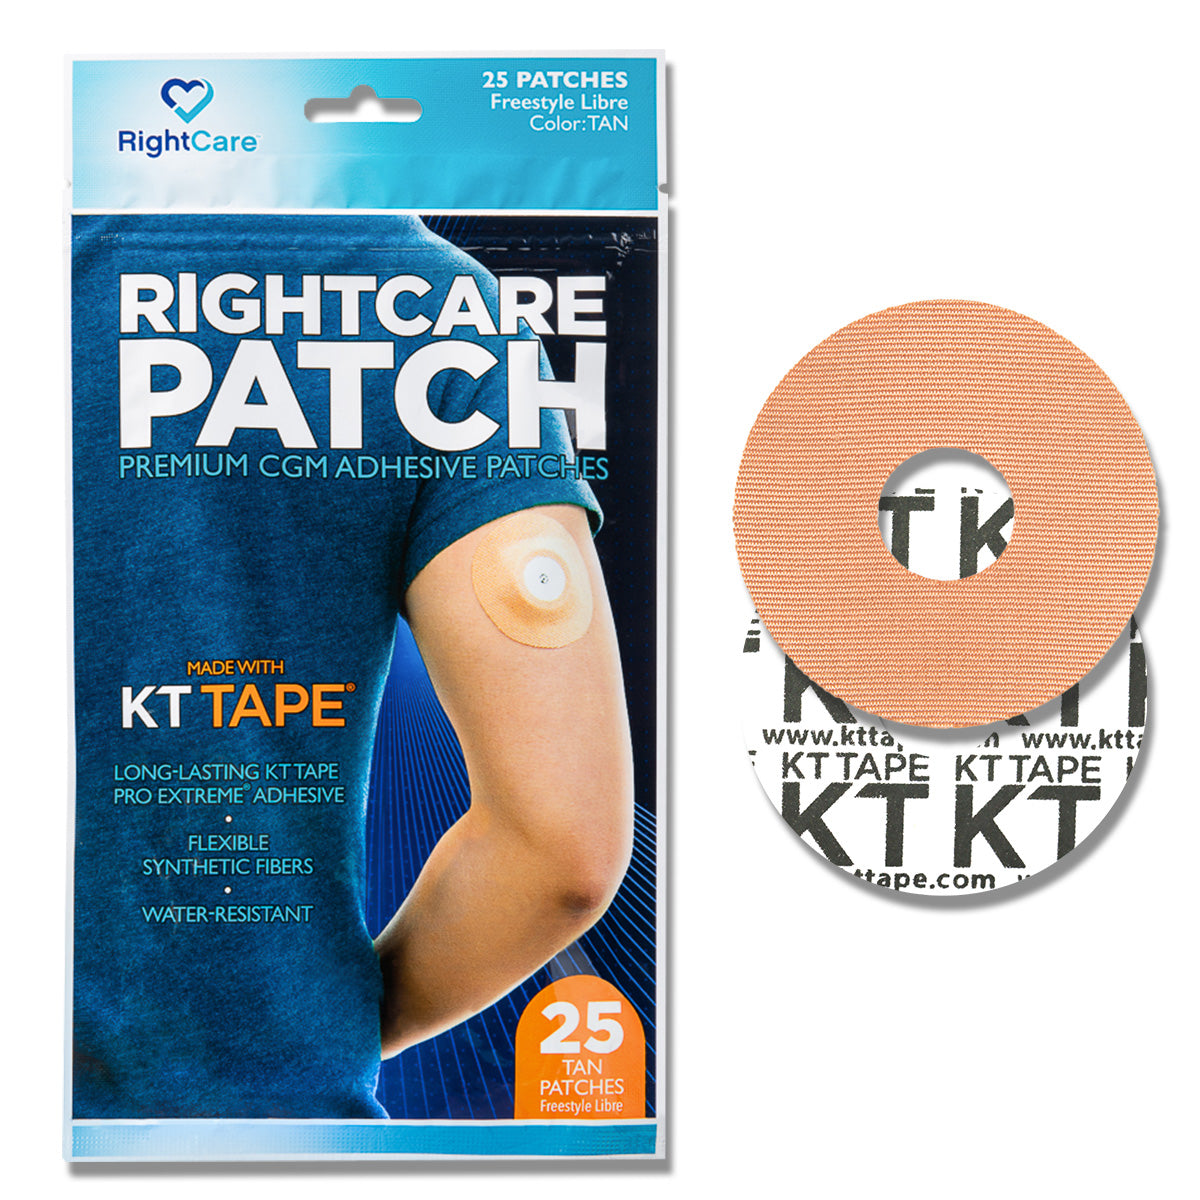 RightCare CGM Adhesive Patch made with KT Tape, Libre, Bag of 25 36735707